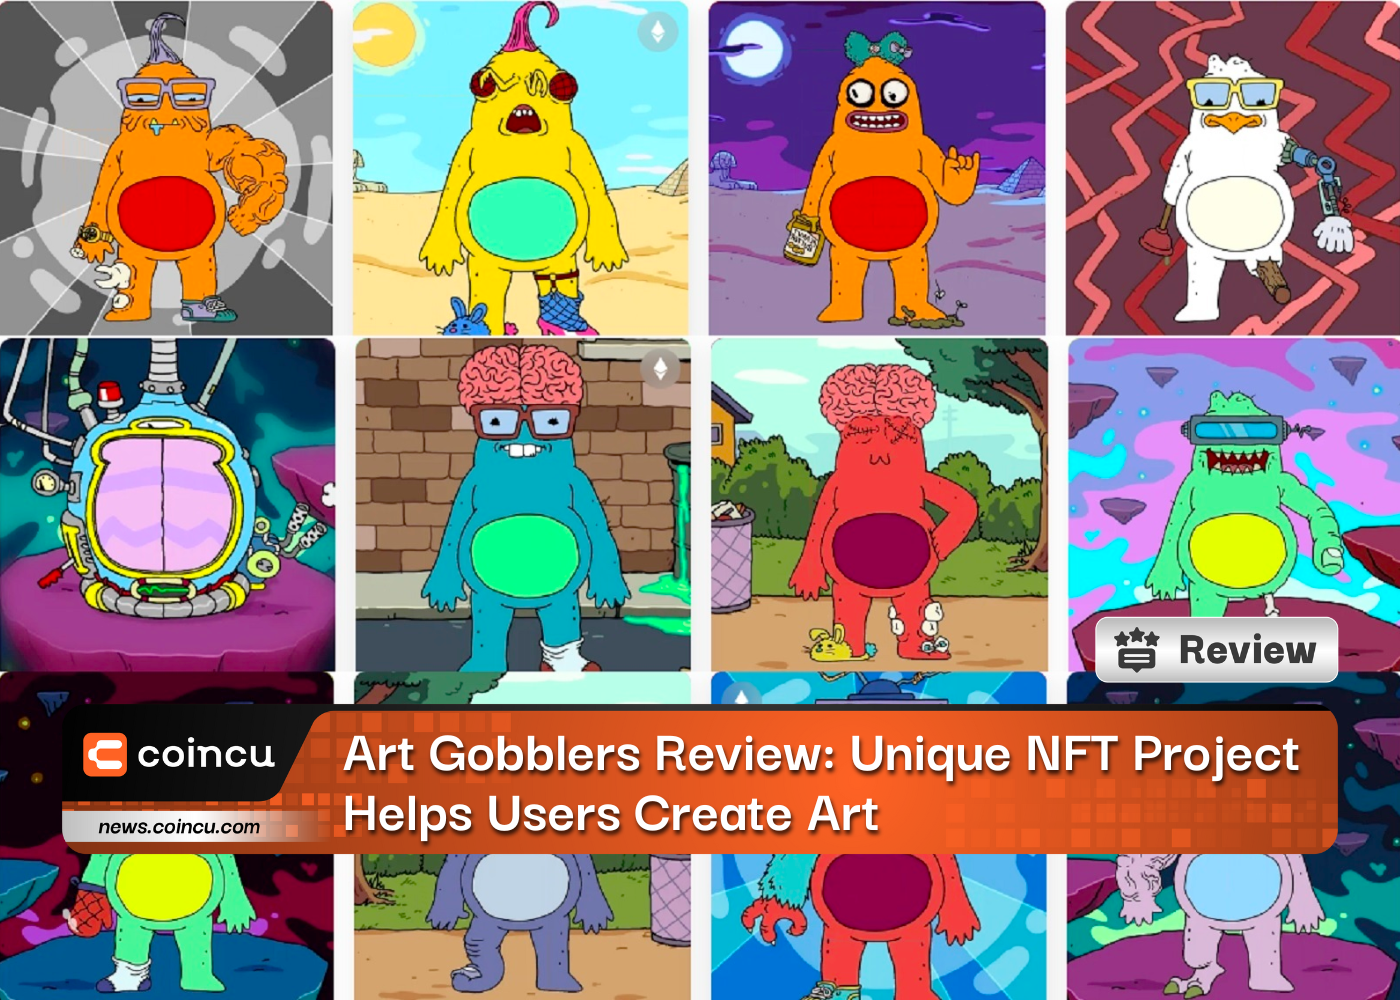 Art Gobblers Review: Unique NFT Project Helps Users Create Art